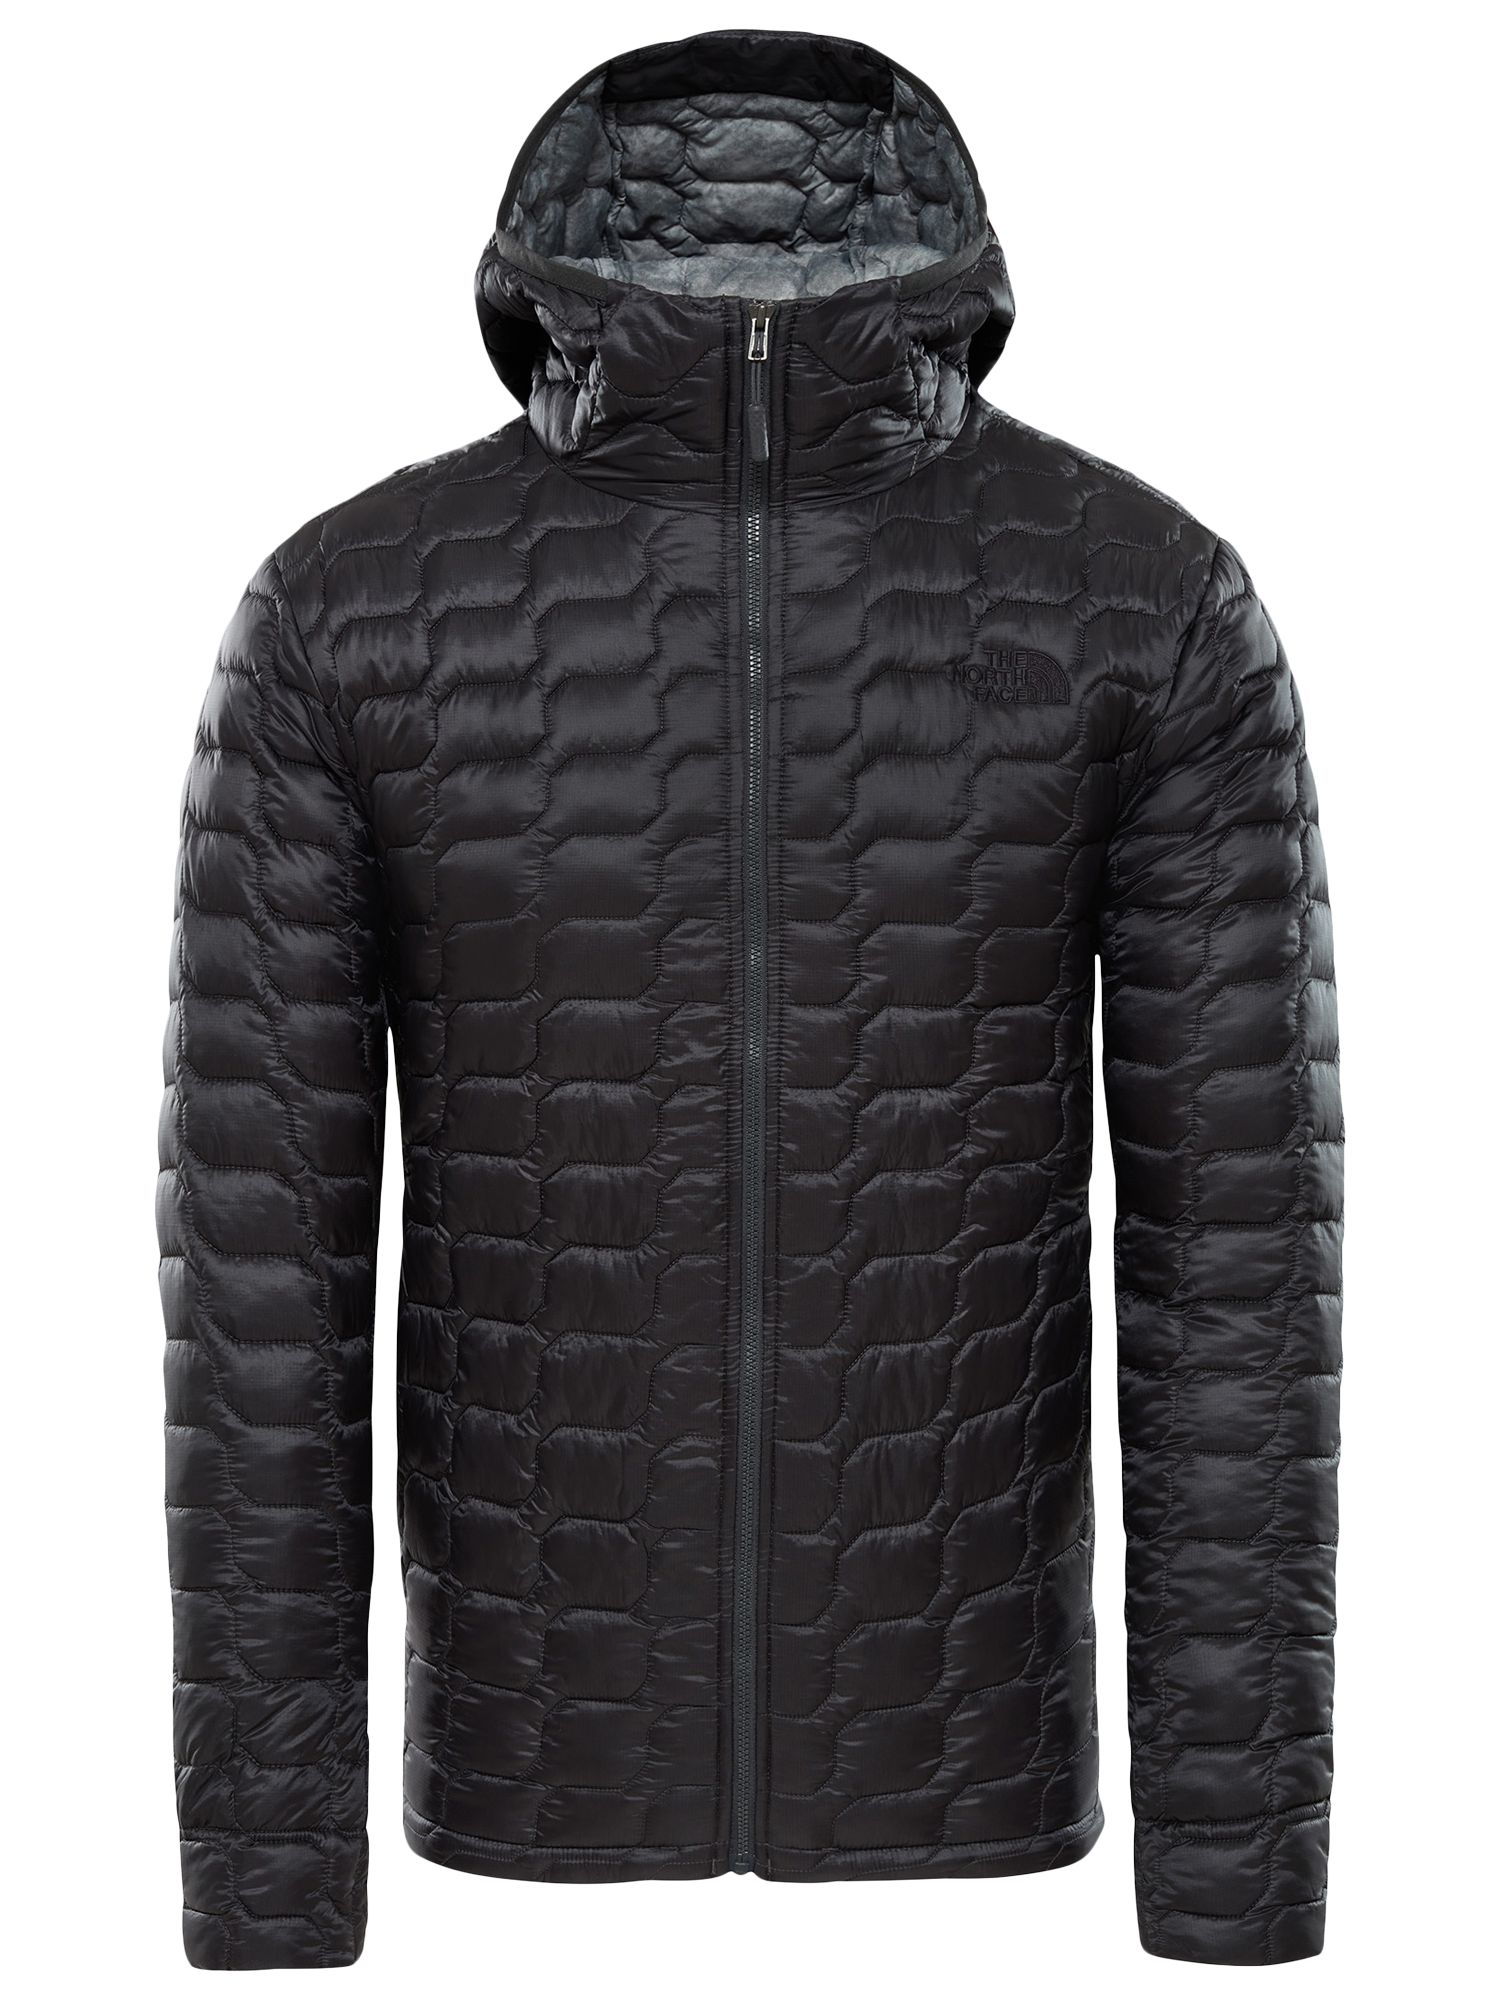 The North Face Thermoball Full-Zip Men's Insulated Jacket, Asphalt Grey